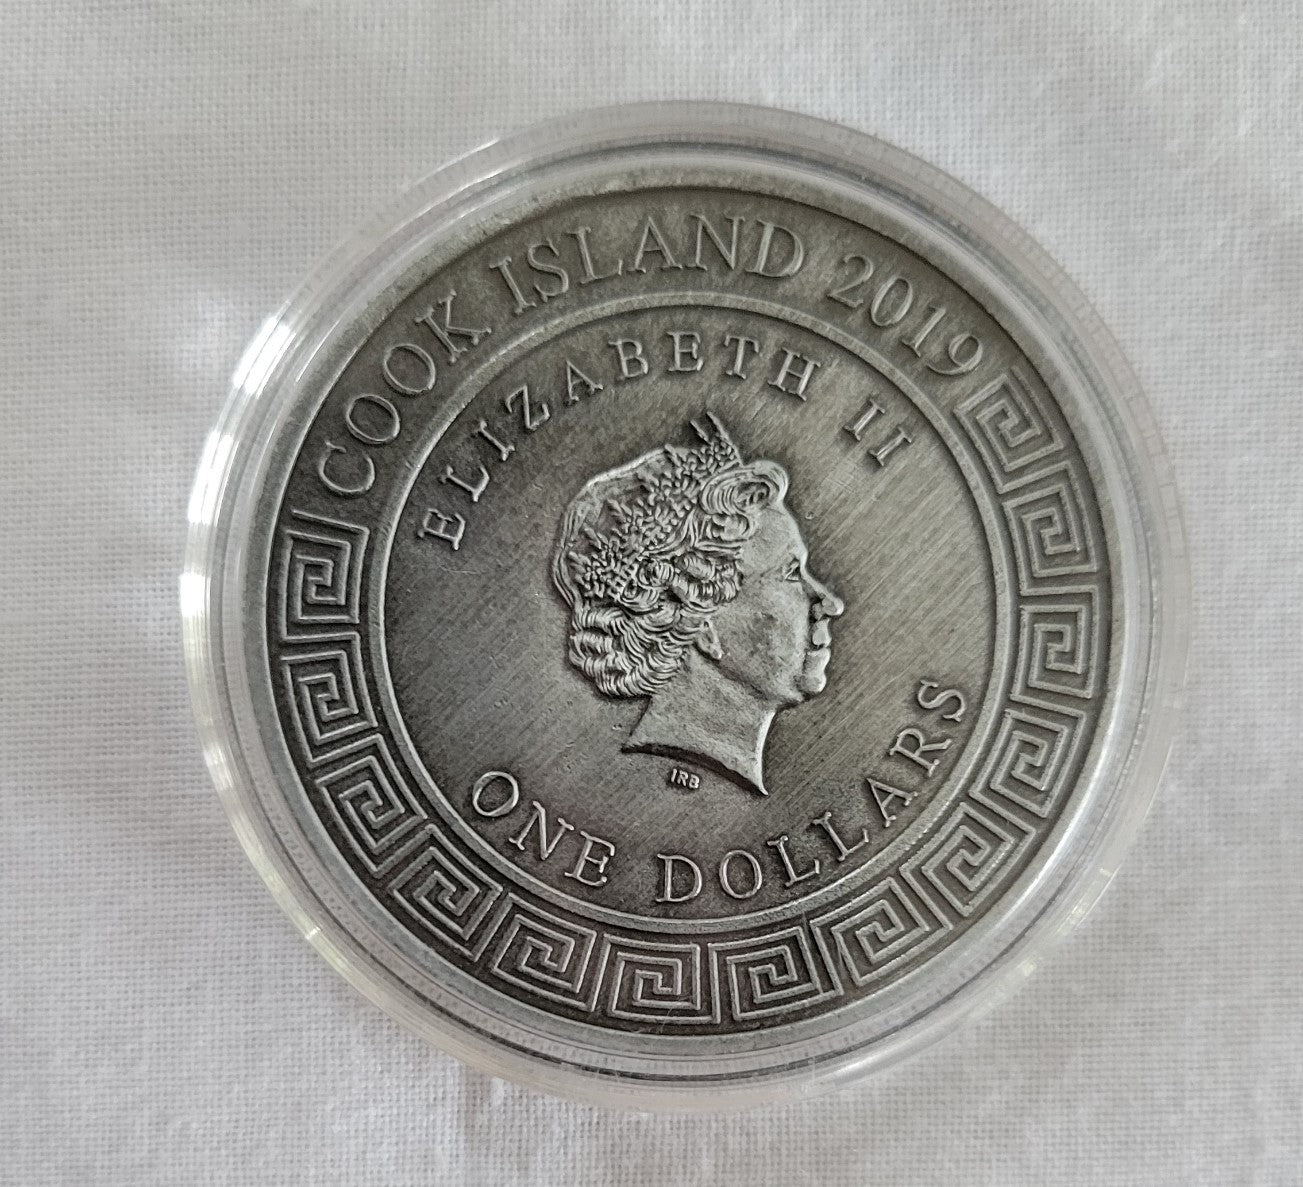 Collectible coin, 2019 one dollar, Cook Island coin with the Egyptian sun god Ra on one side and Queen Elizabeth II on the other. Back view.